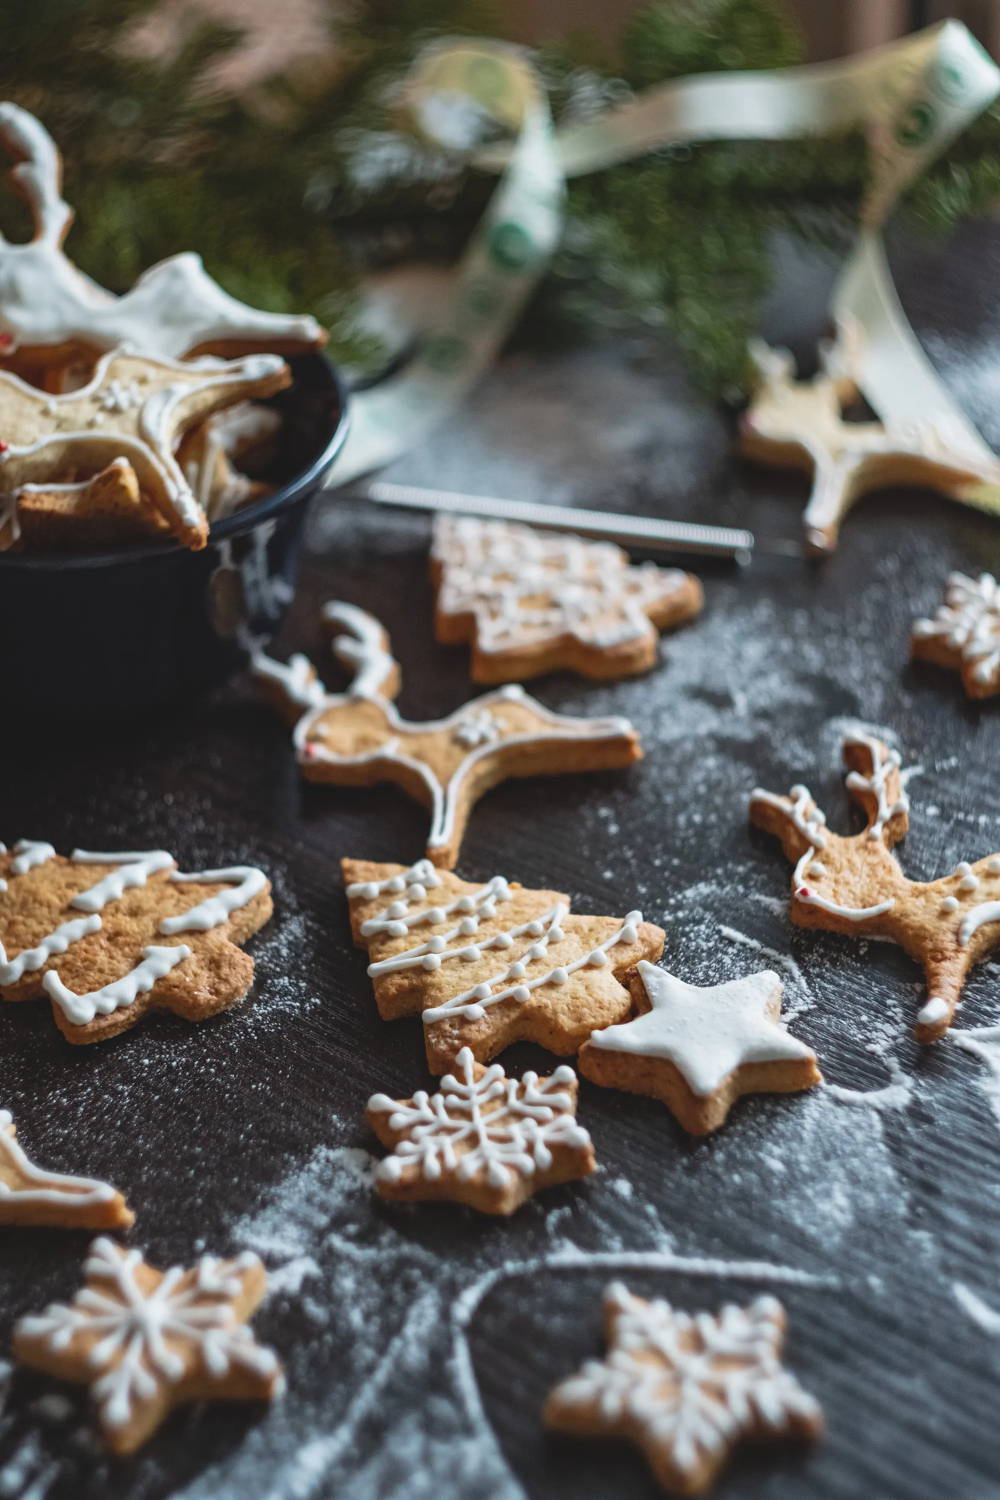 Iced and decorated gingerbread cookies on a counter dusted with flour.